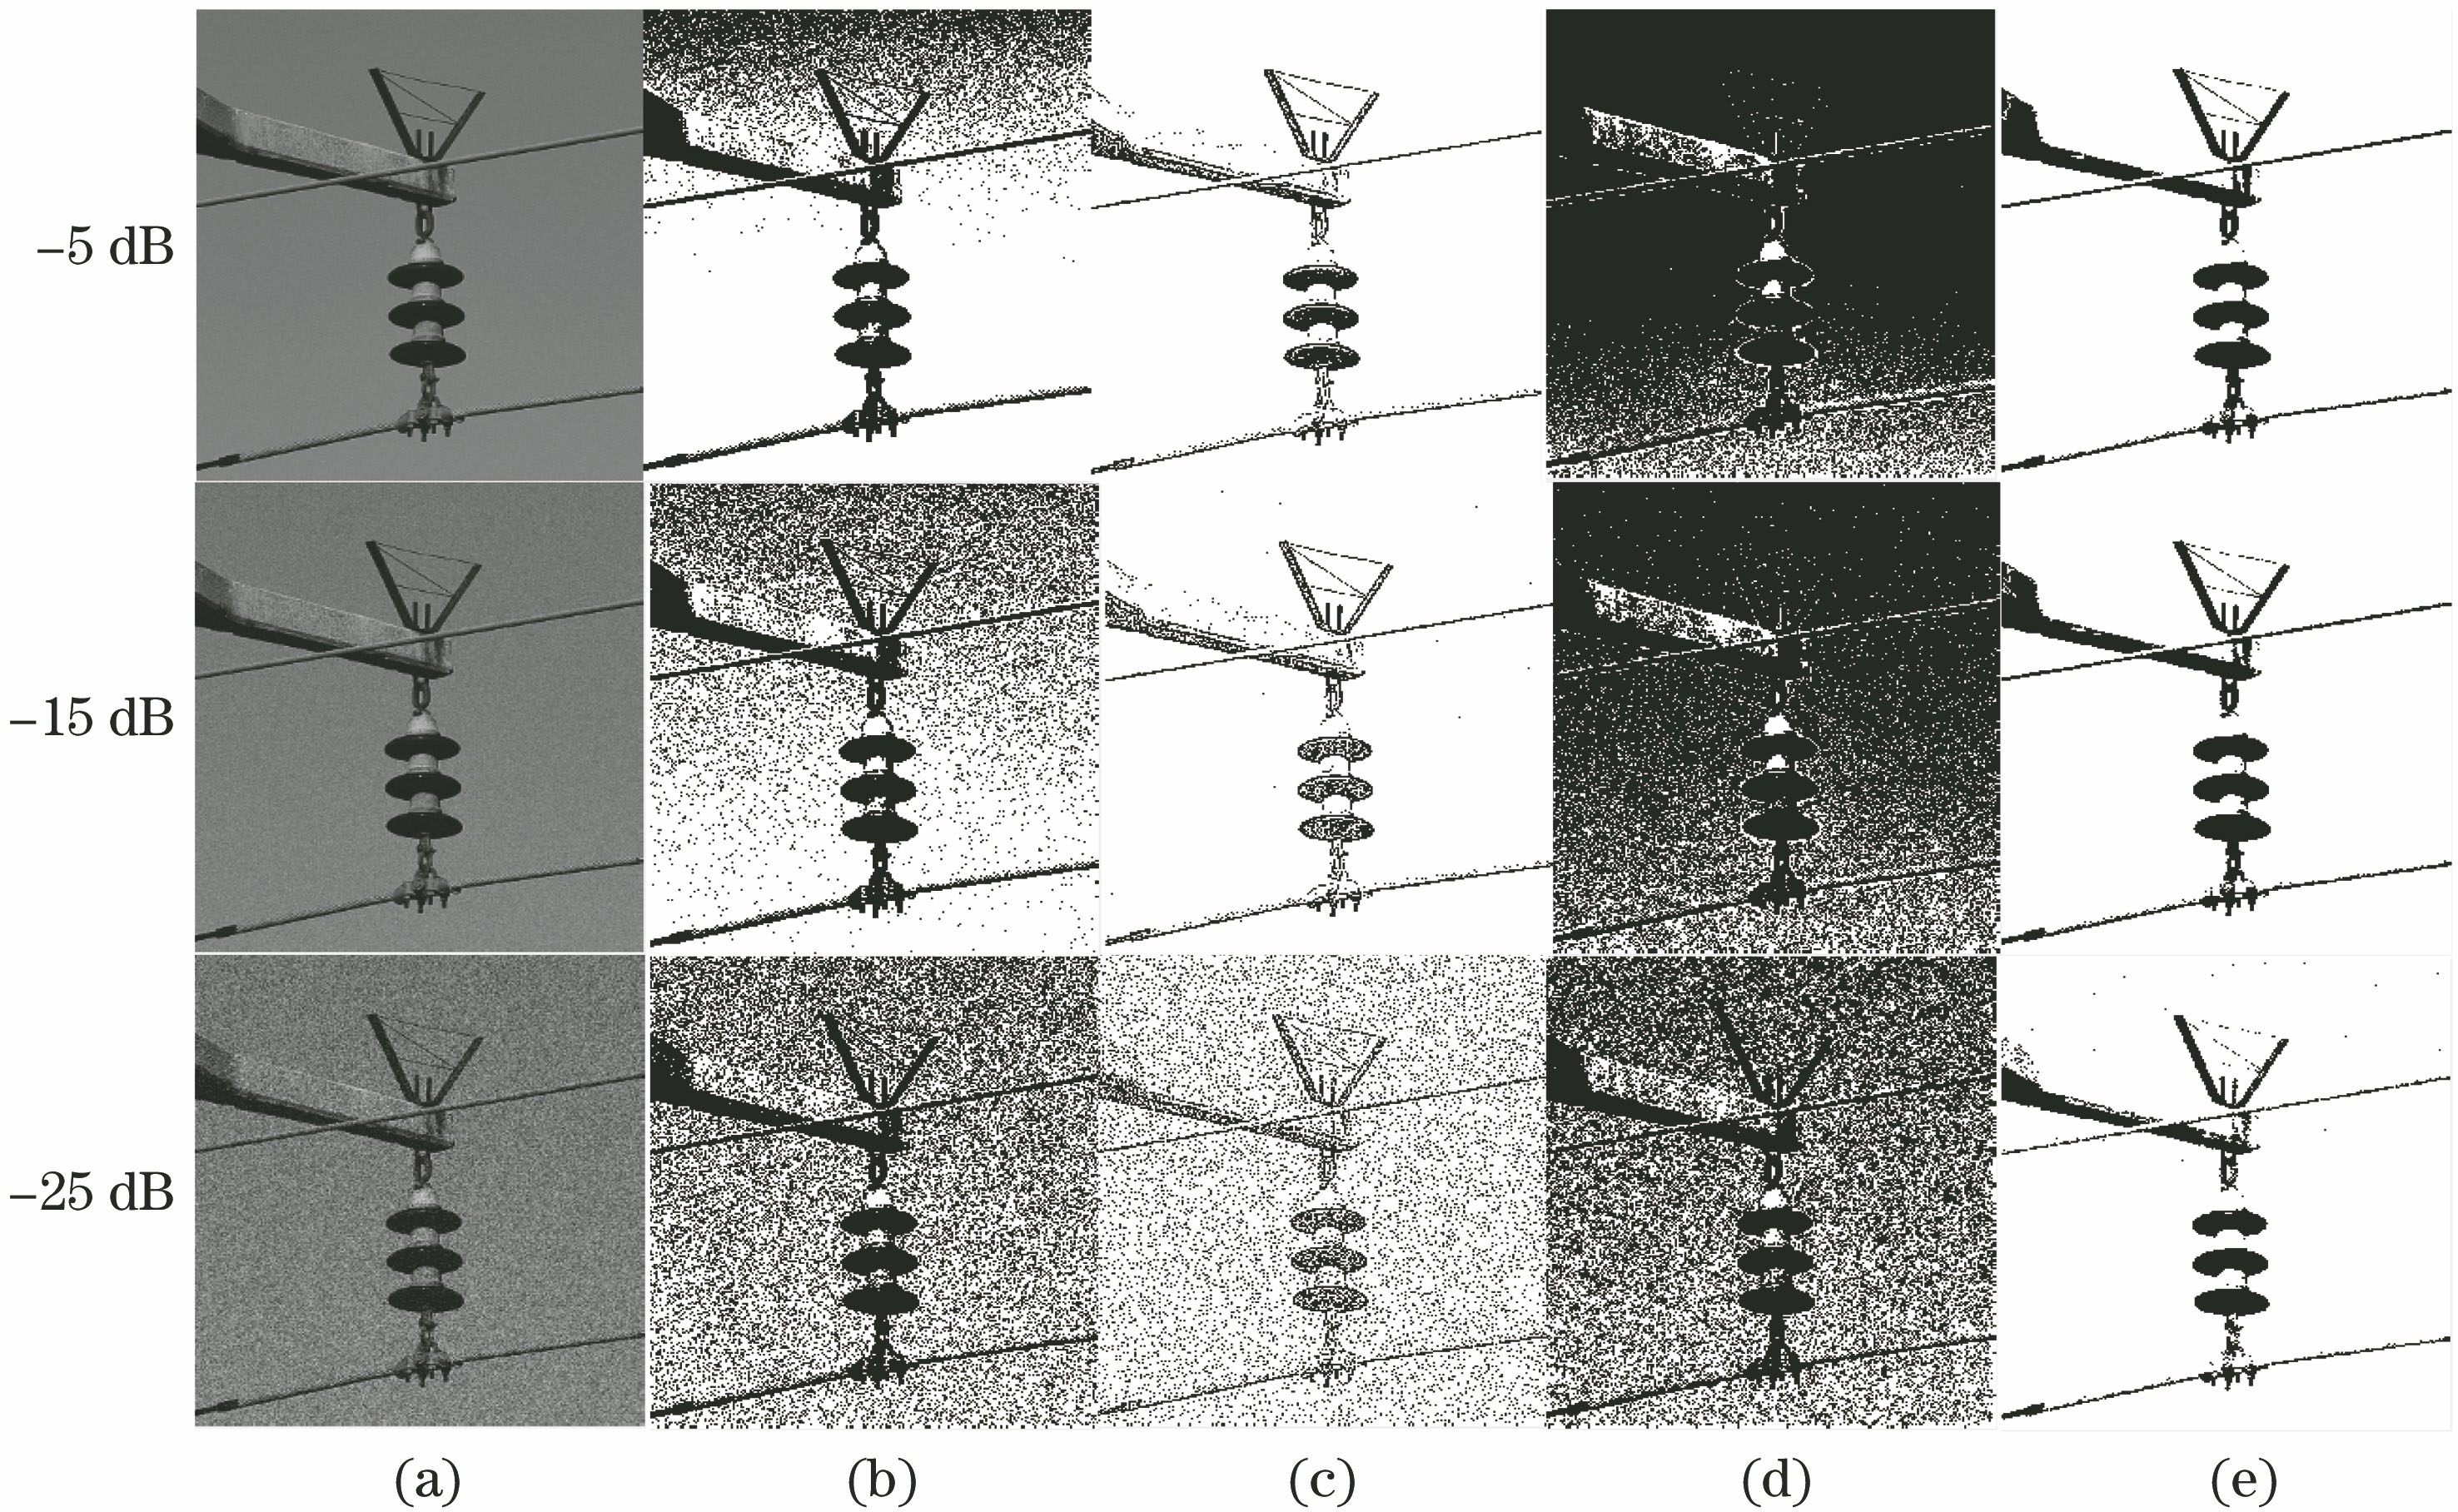 Segmentation results of insulator images under different SNRs. (a) Gray images after adding noise; (b) segmentation results of MIEP; (c) segmentation results of algorithm in Ref. [11]; (d) segmentation results of algorithm in Ref. [4]; (e) segmentation results of proposed method